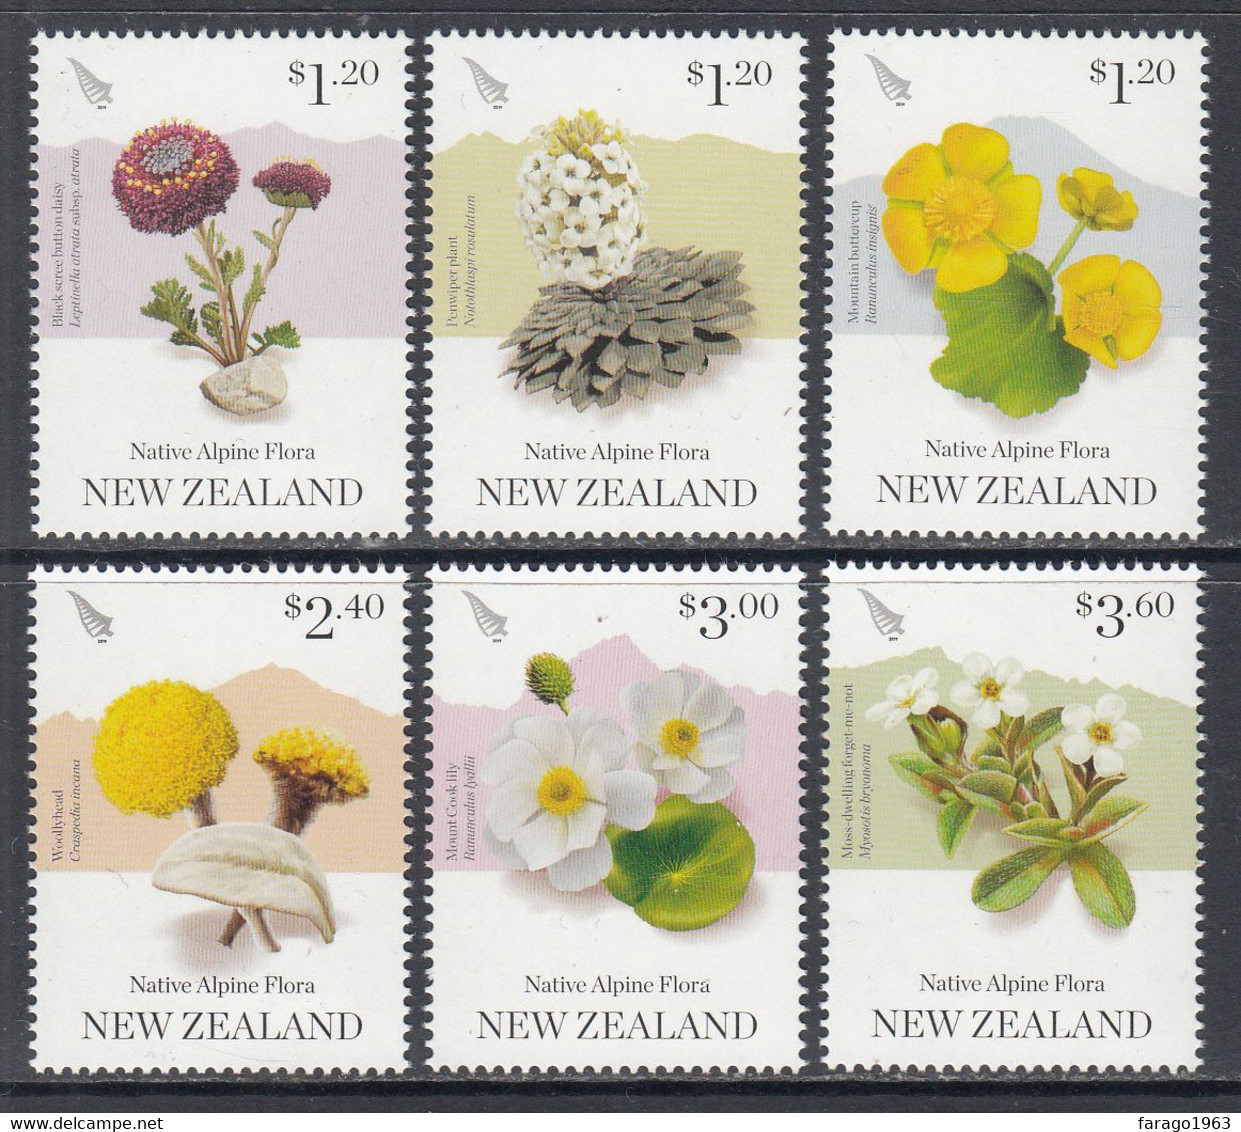 2019 New Zealand Alpine Flora Flowers Complete Set Of 6 MNH   @ BELOW FACE VALUE - Unused Stamps